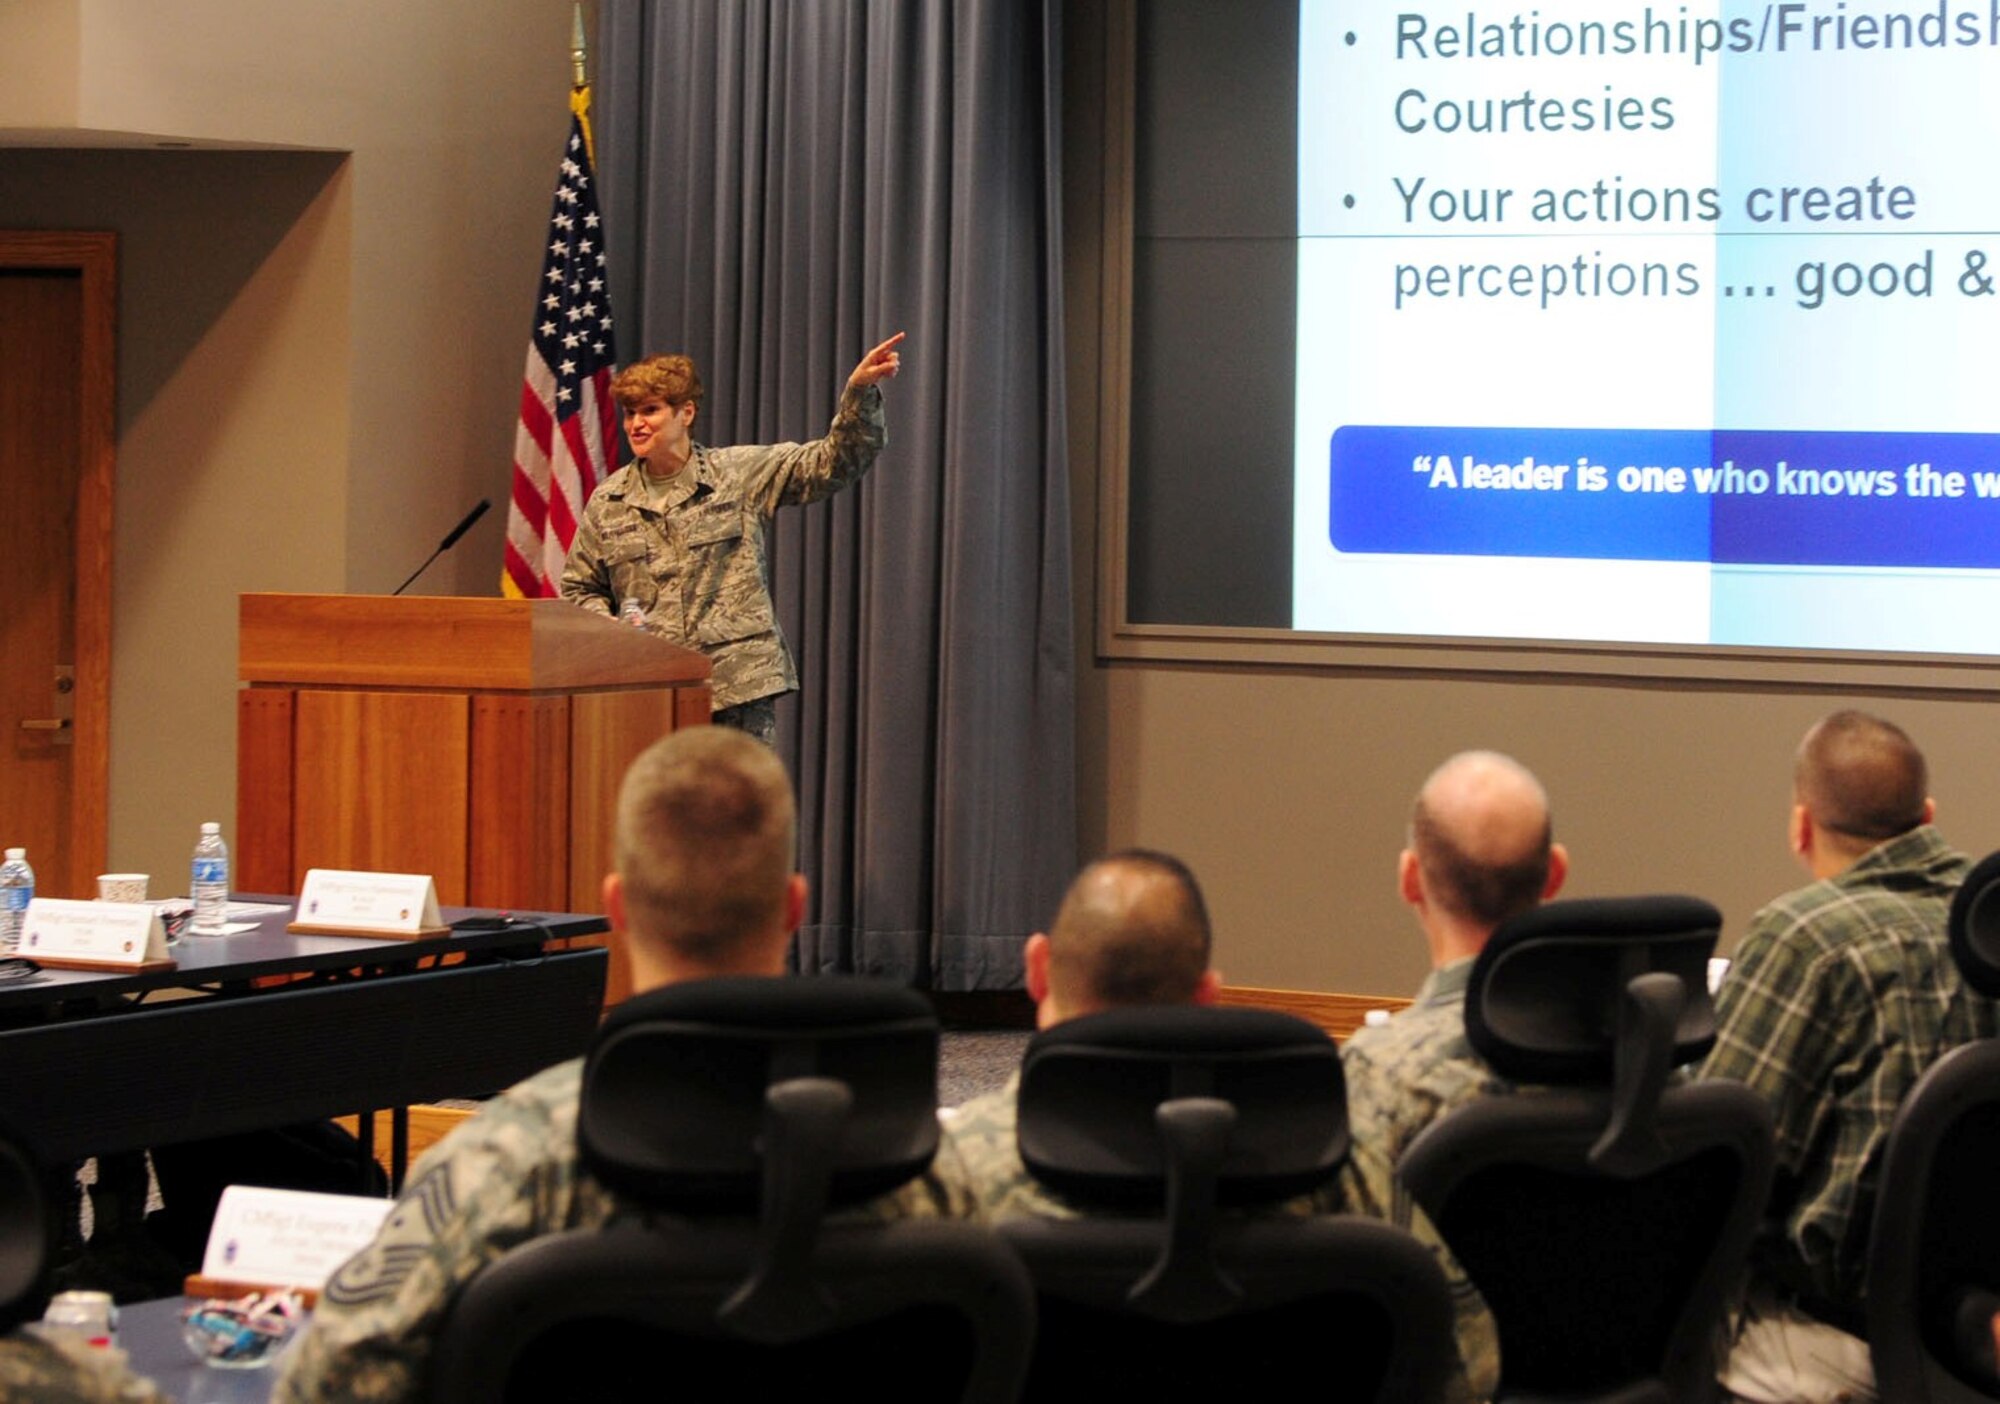 Gen. Janet Wolfenbarger, Air Force Materiel Command commander, presents her Leadership Perspective at the 2013 AFMC Chiefs' Orientation. (U.S. Air Force photo/Airman 1st Class James Jacobs)